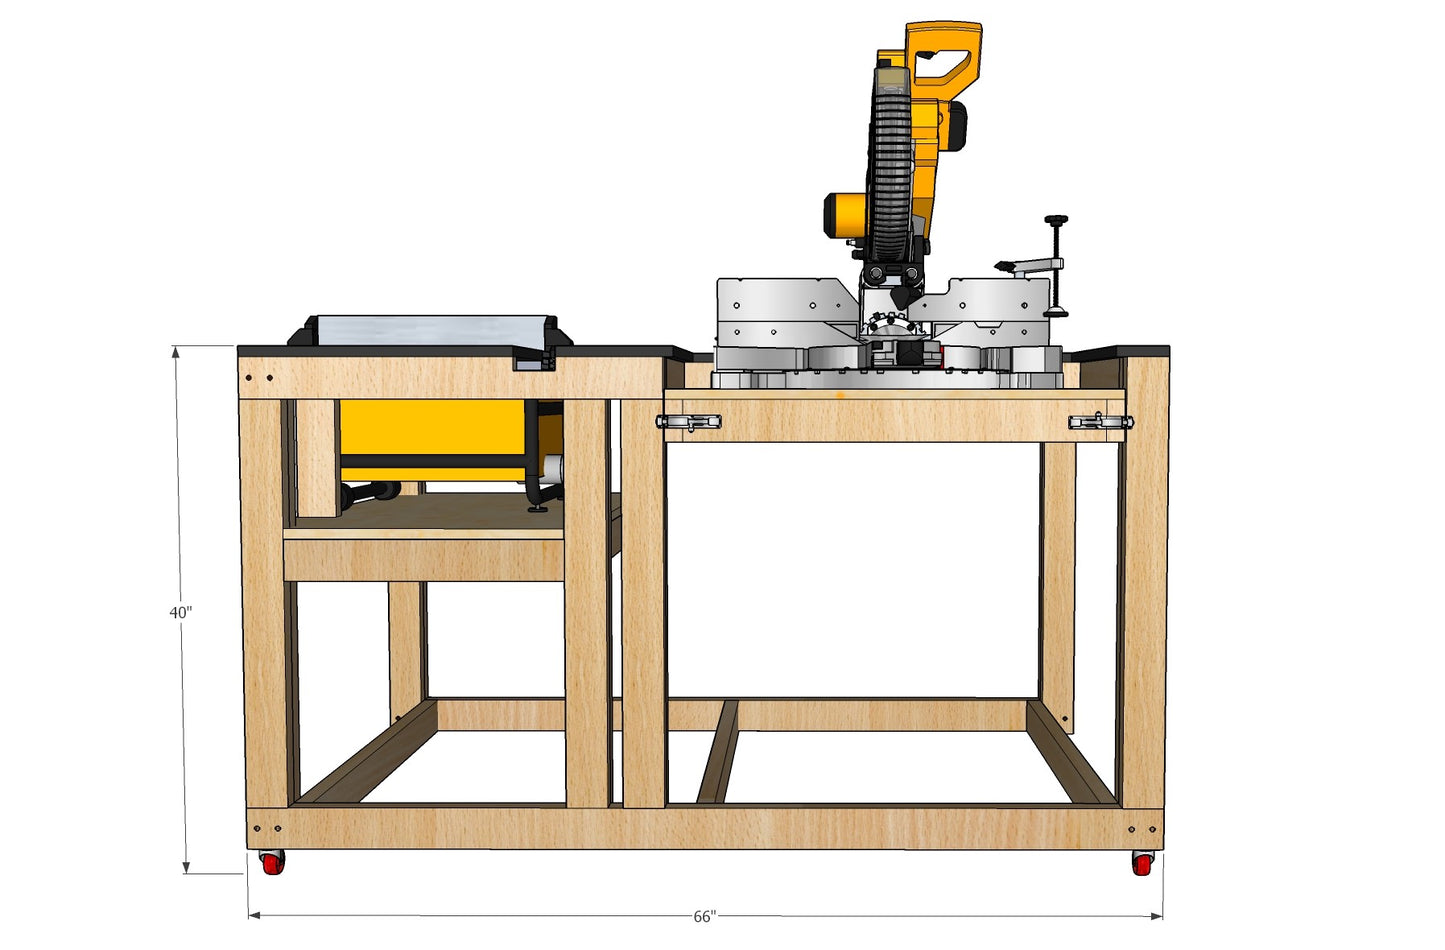 Compact Mobile Workbench Plans for Miter / Table Saw - Instant PDF Download - Imperial Units